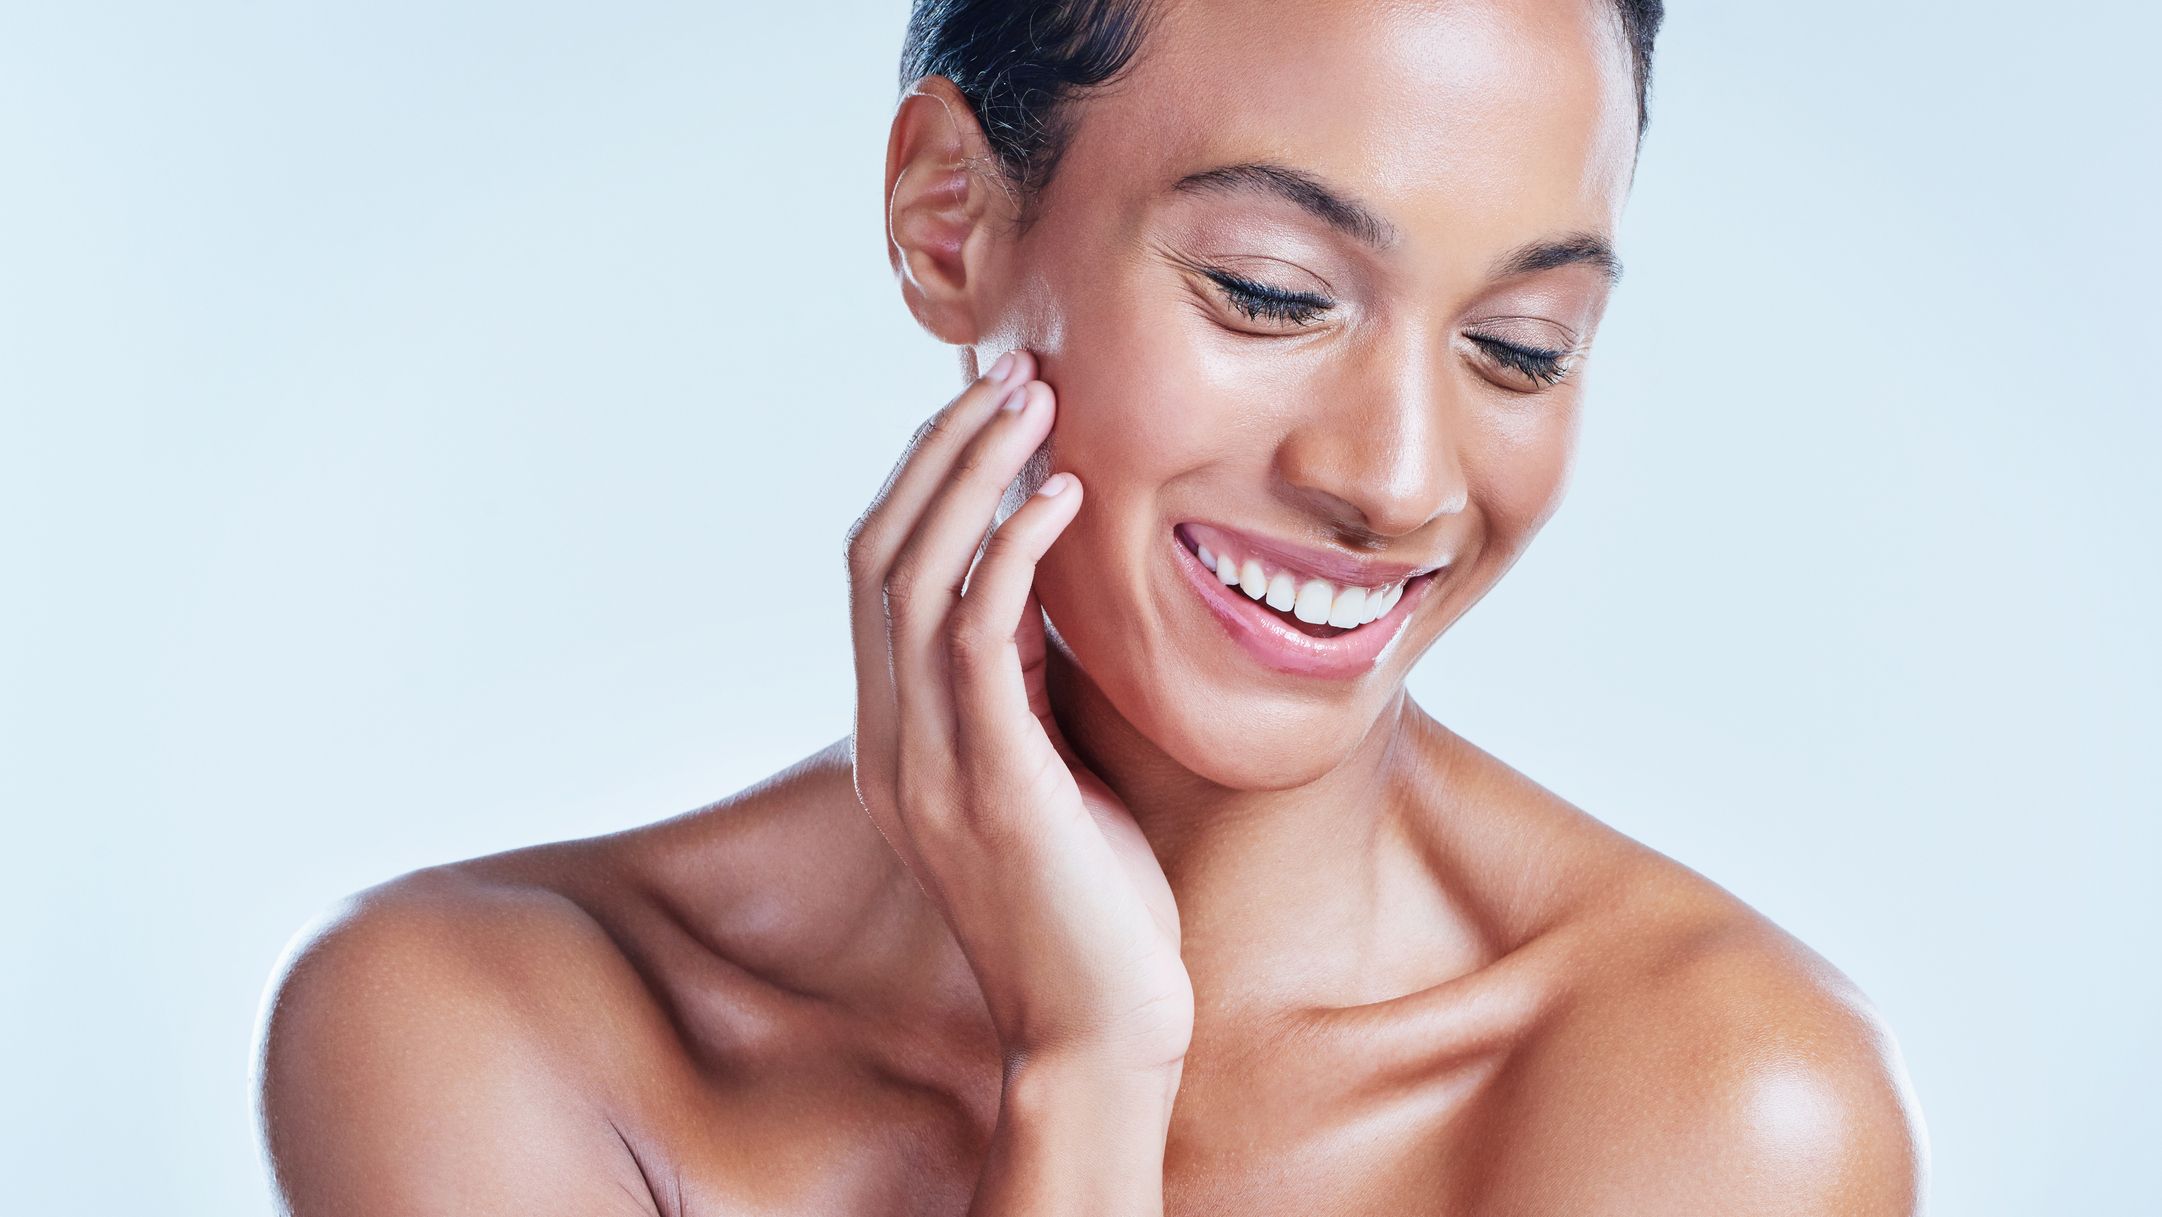 How To Get Clear Skin In 24 Steps, According To Dermatologists